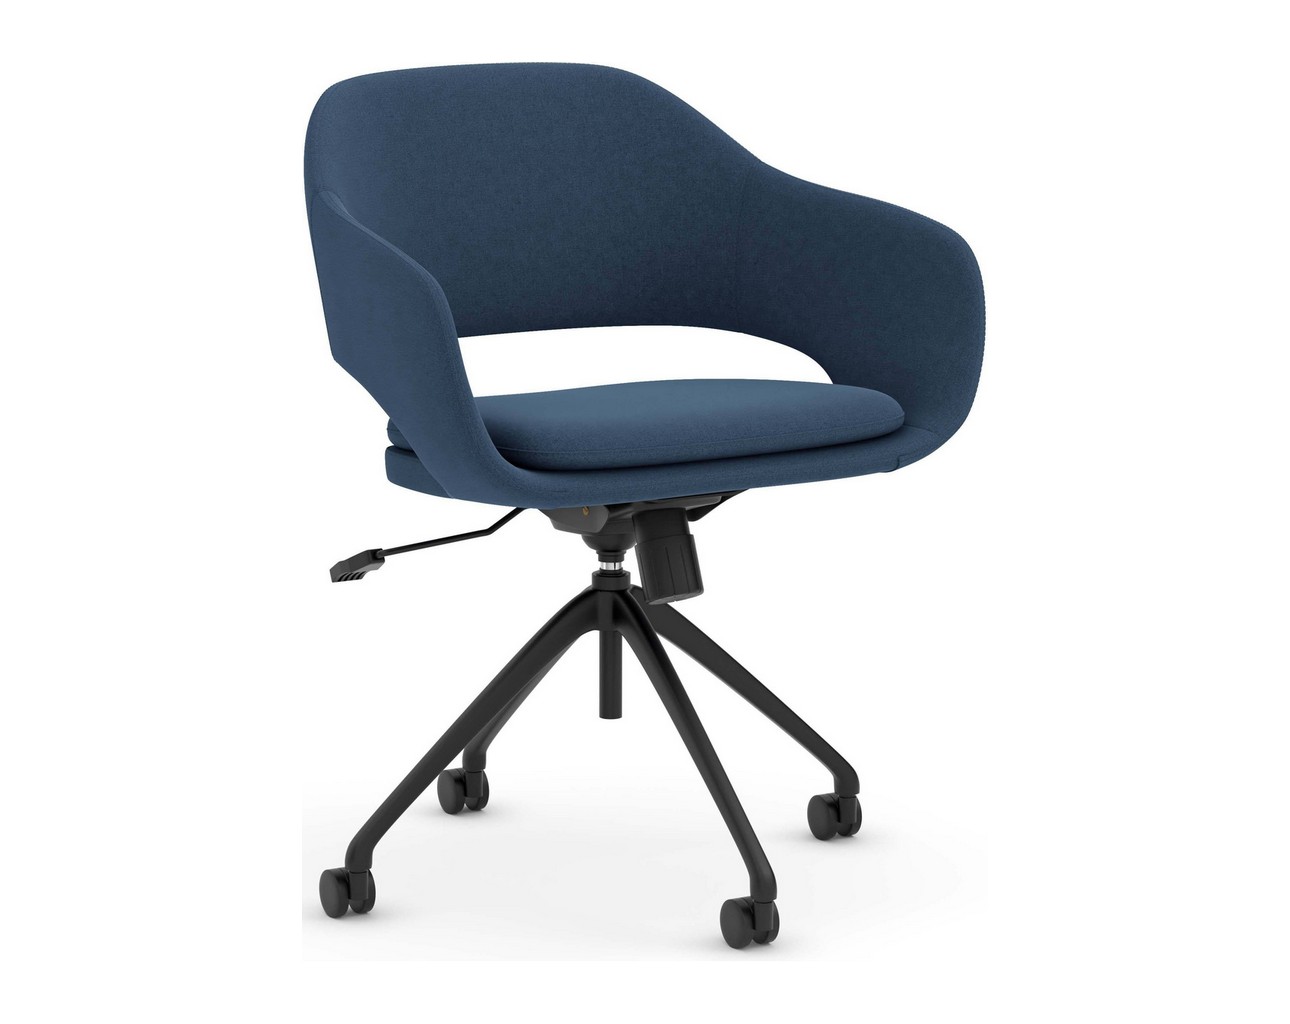 Kona Guest Chair with Swivel Base – Blue